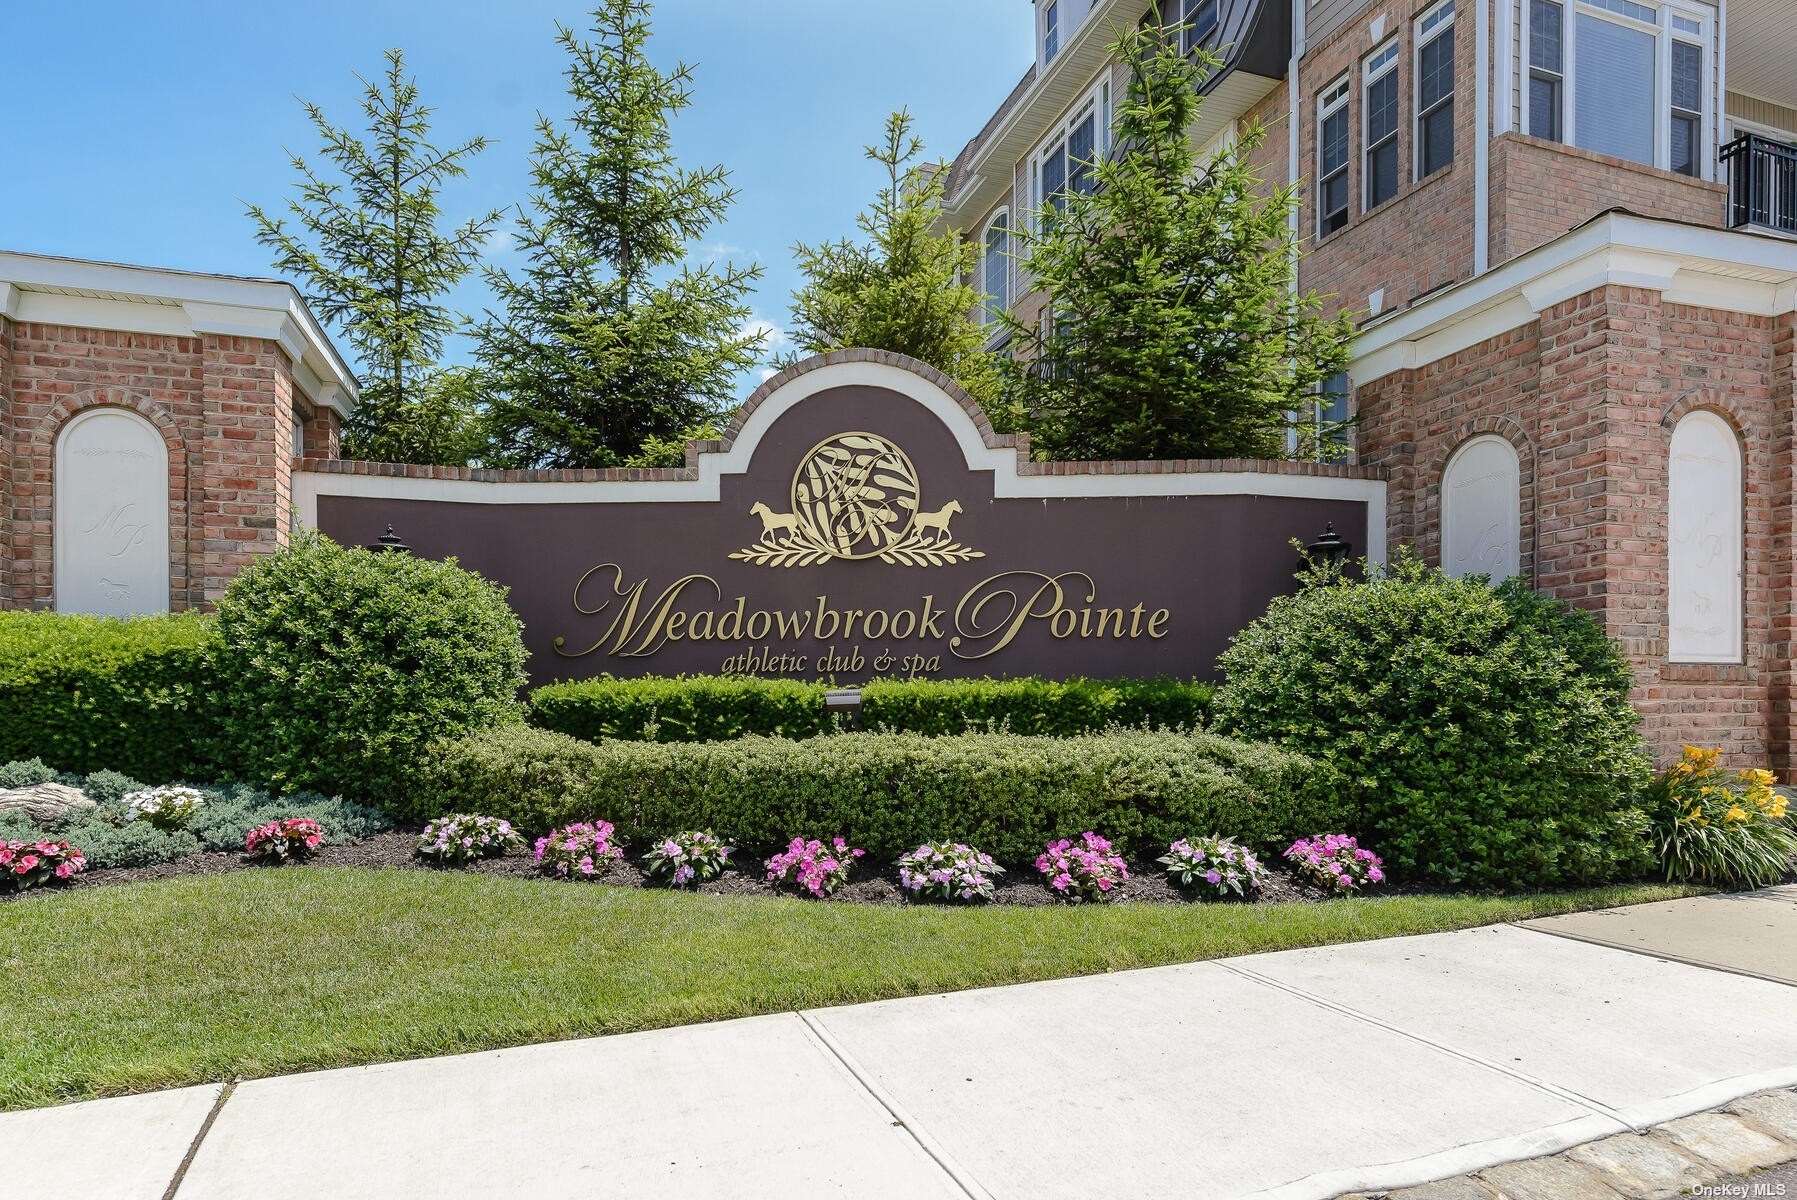 Welcome to Meadowbrook Pointe